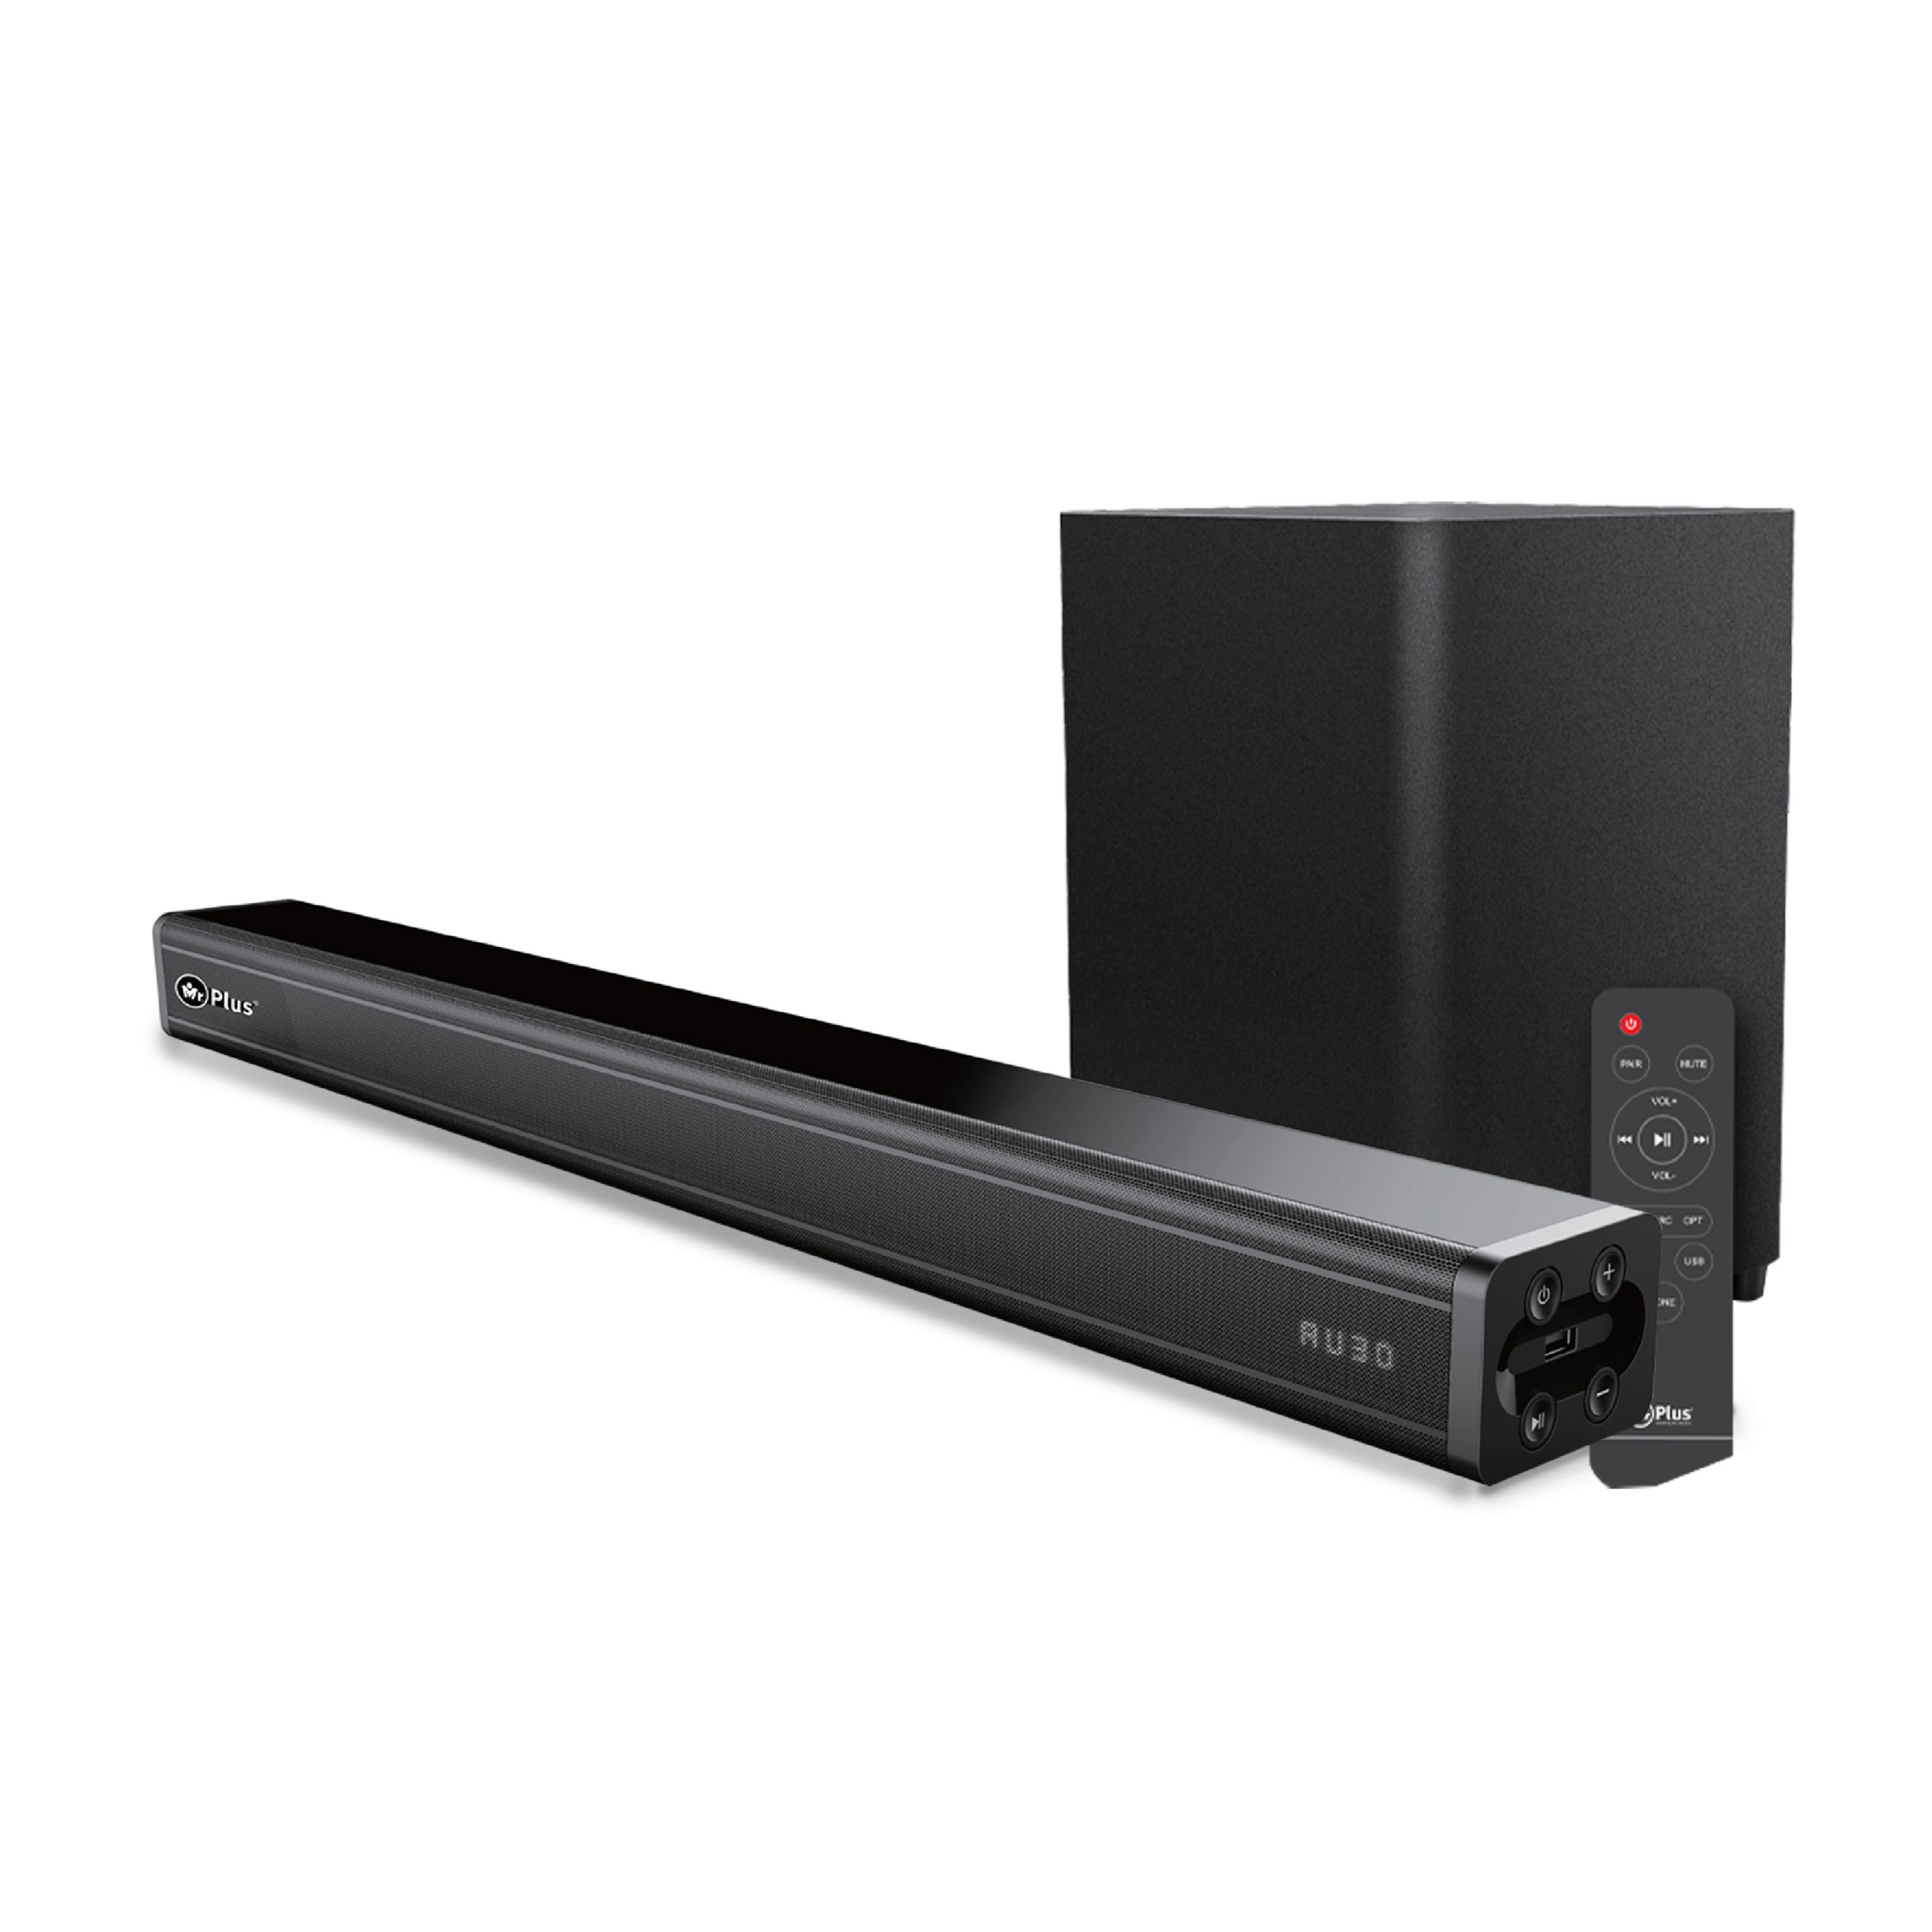 MR. Plus 120w Soundbar with Wireless Subwoofer for Extra Deep Bass, Function: USB/AUX/BT/HDMI/OPT Mr 2842